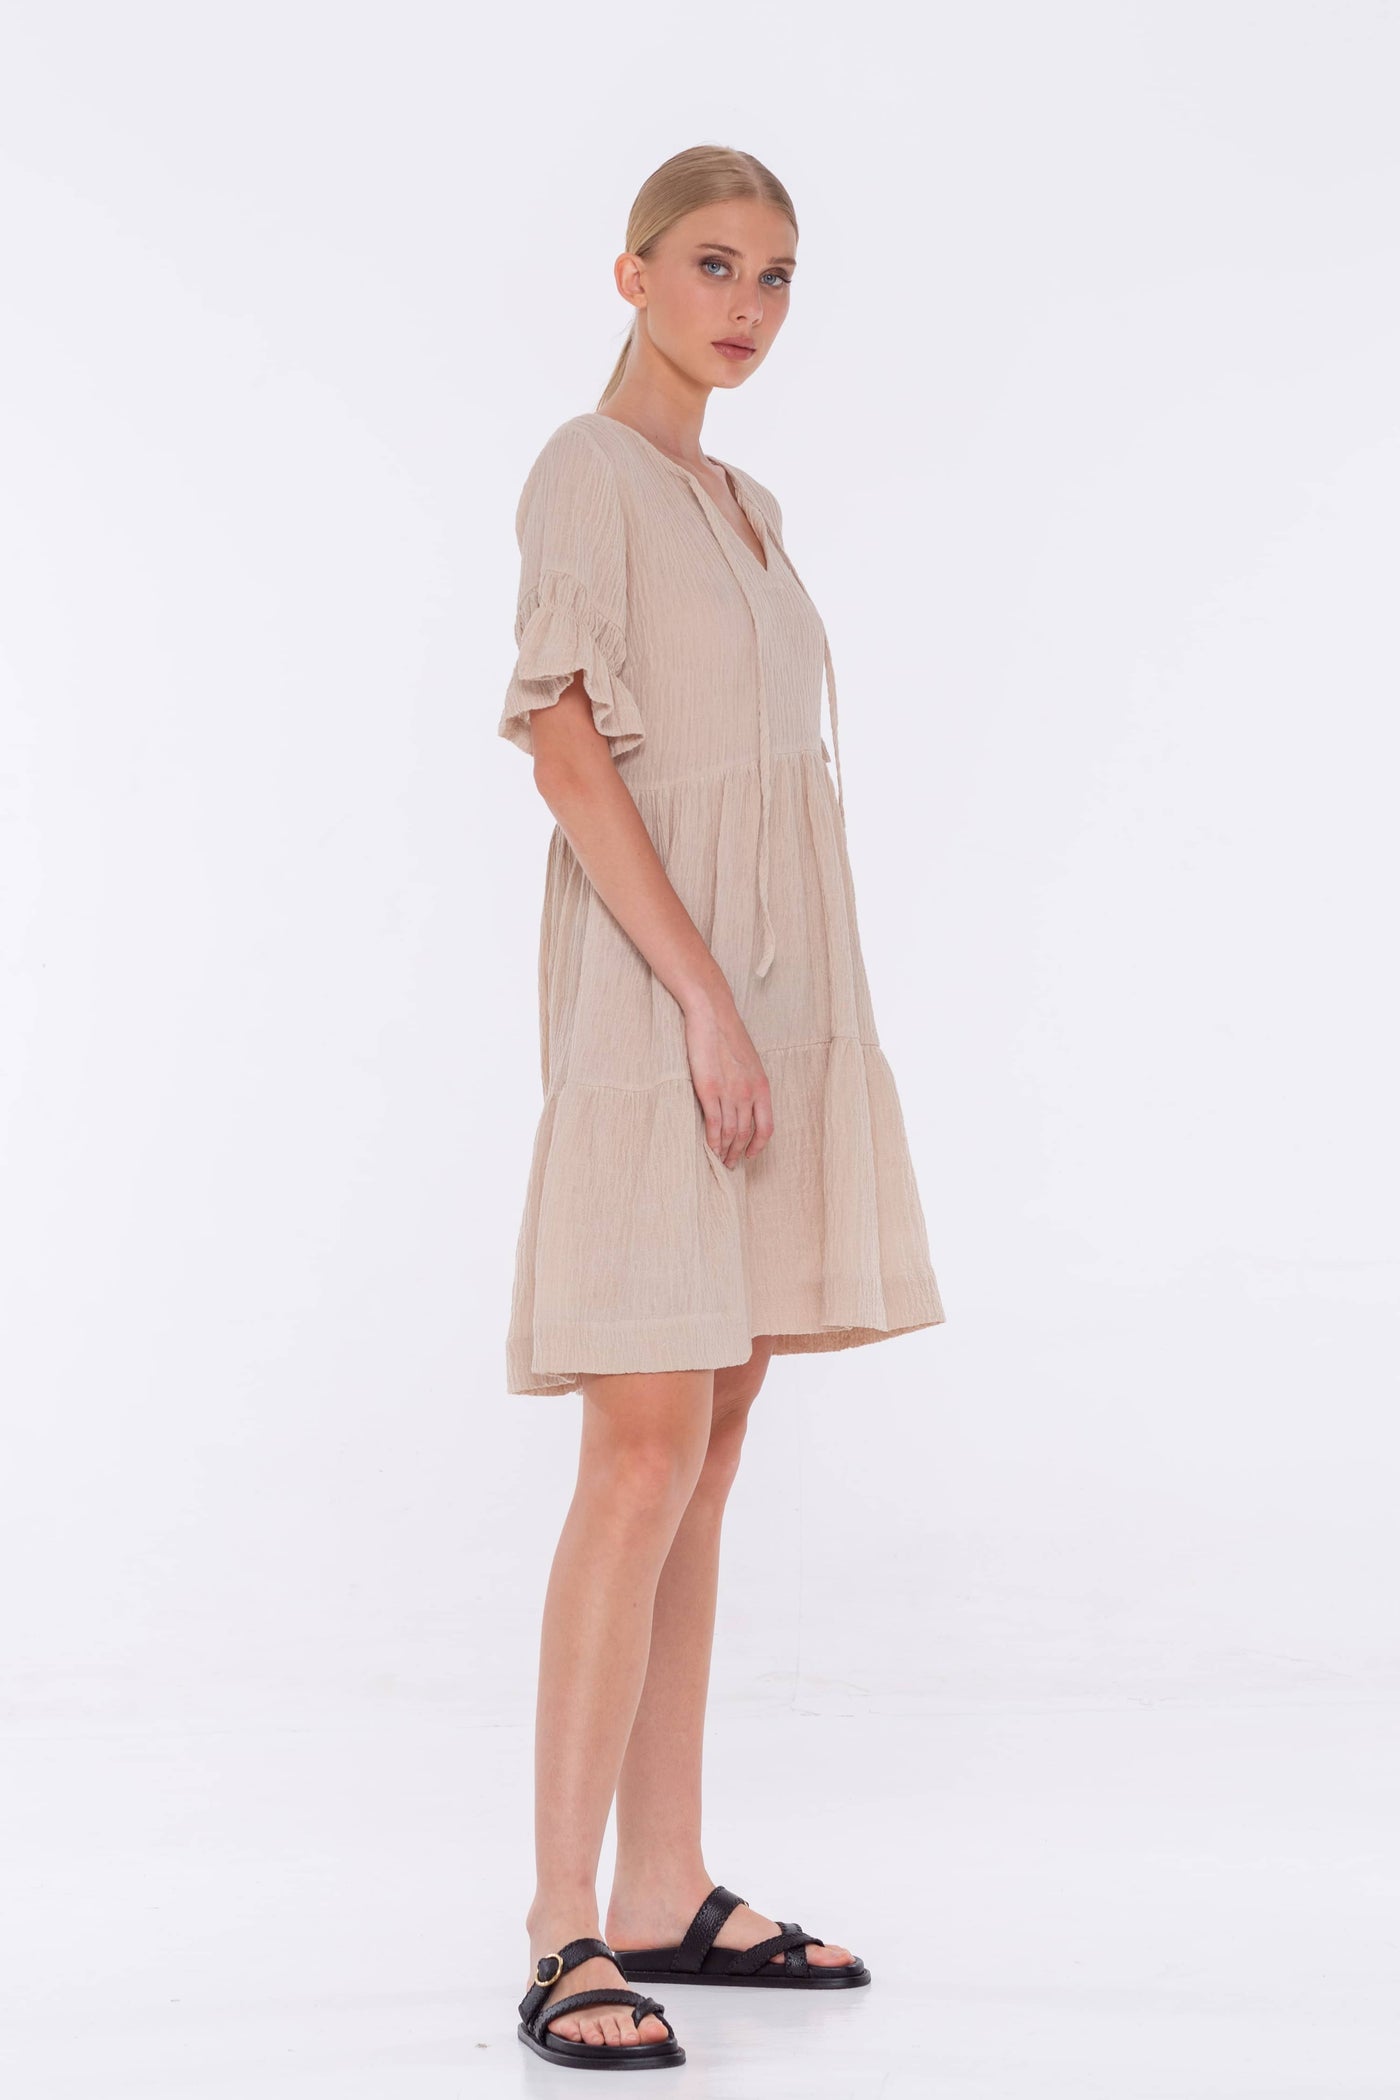 The beloved bella mini is back for spring in linen rayon crinkle.  It features a tiered skirt, sleeve gather details and the bound neck extends into ties with a front neck slit.  Linen Rayon Crinkle with rayon lining Mini length Tiered skirt Short sleeve with gather details Bound neck extends into ties Front neck slit